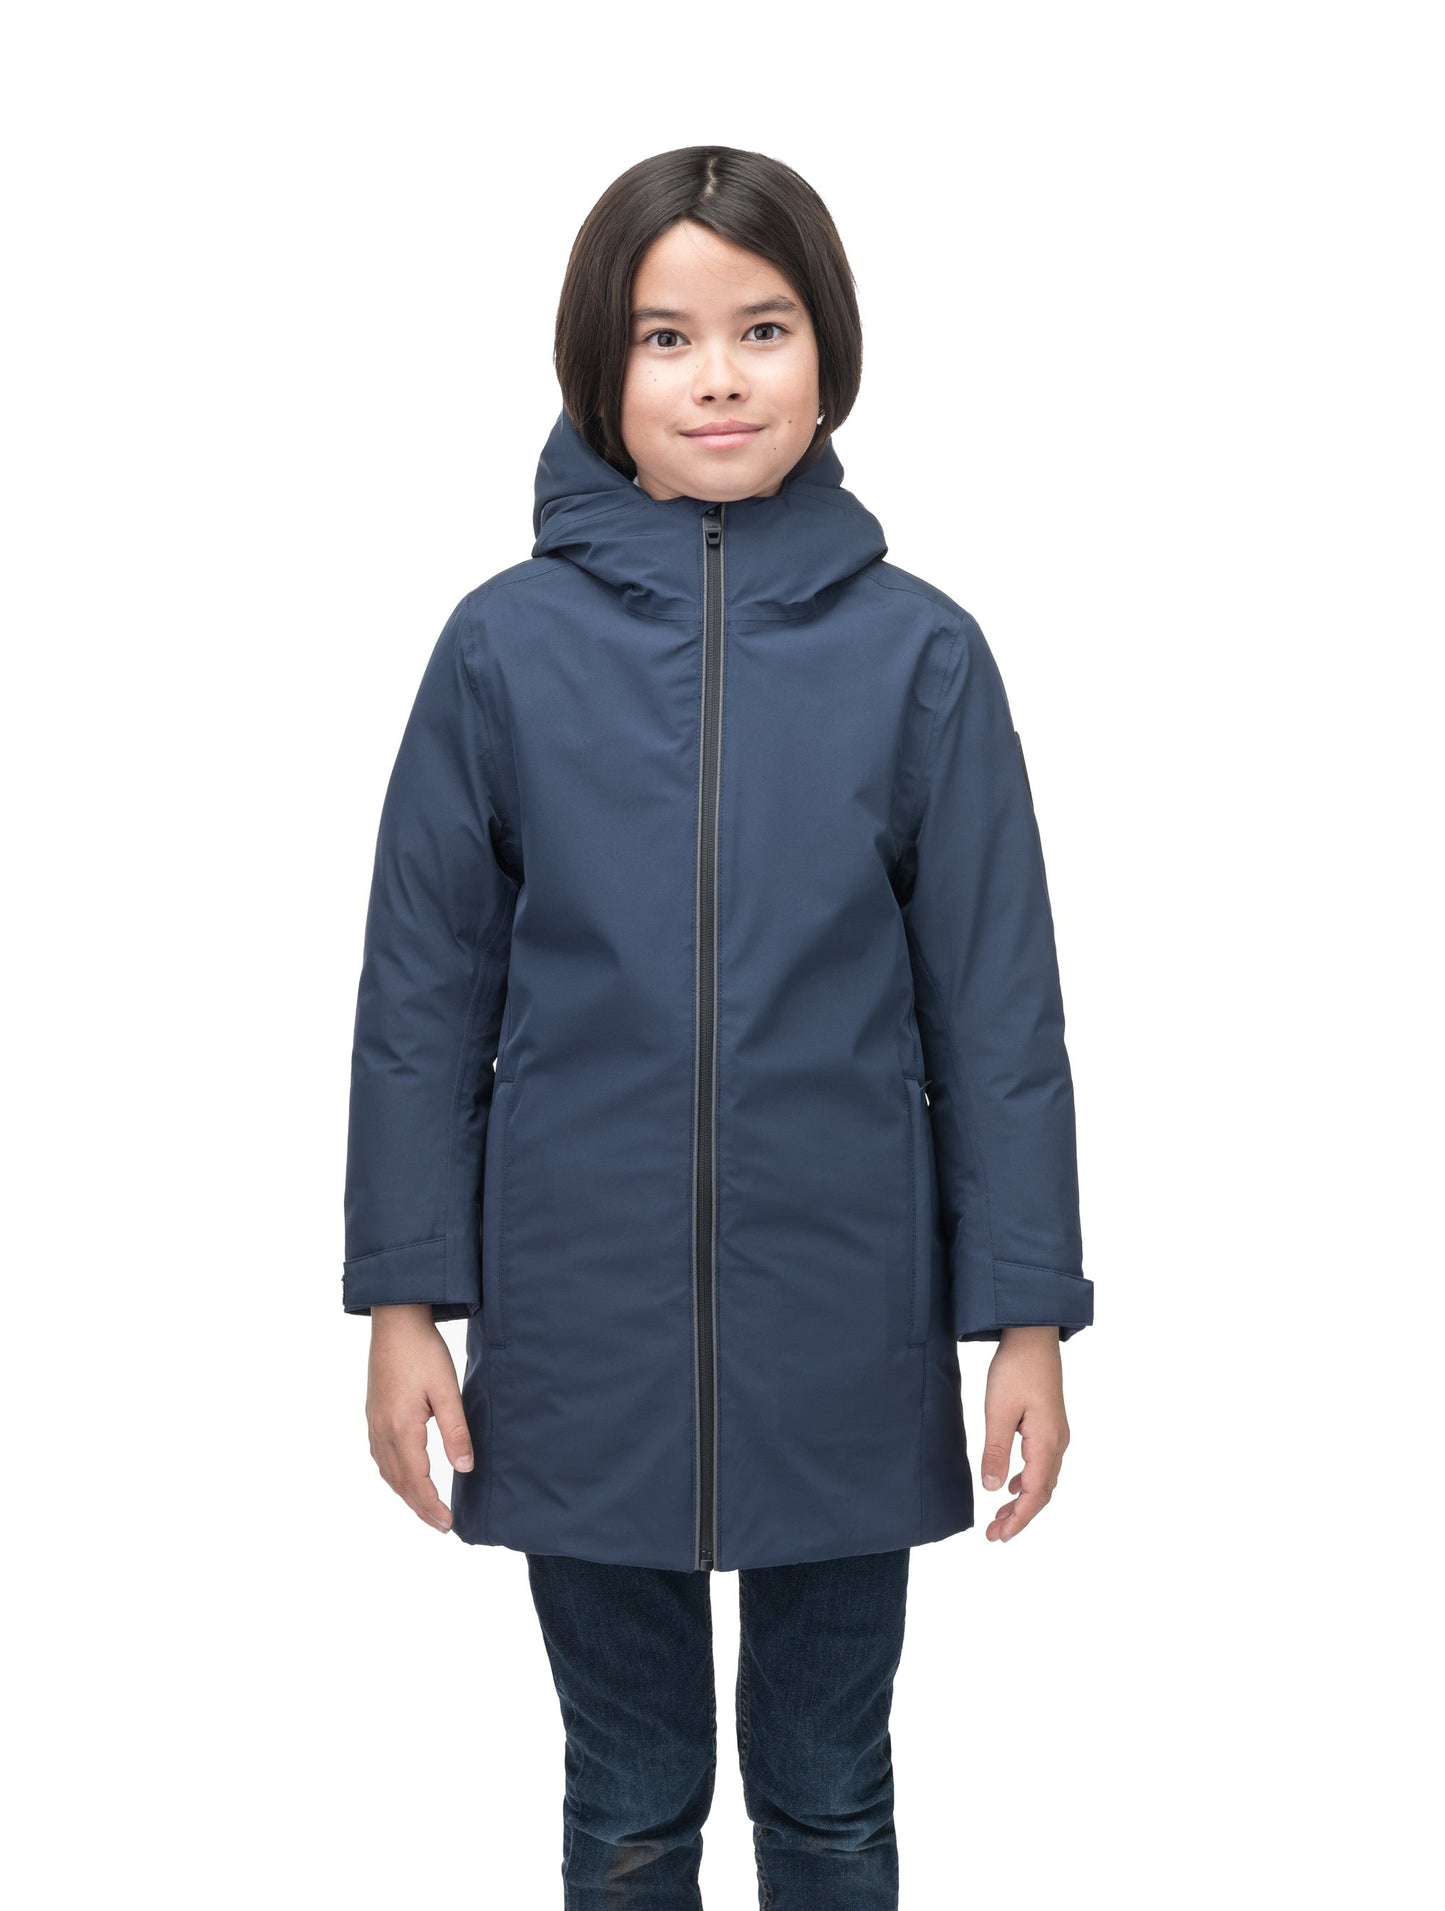 Little Comet Kids Parka in thigh length, Canadian duck down insulation, non-removable hood, two-way front zipper, packable body, in Marine